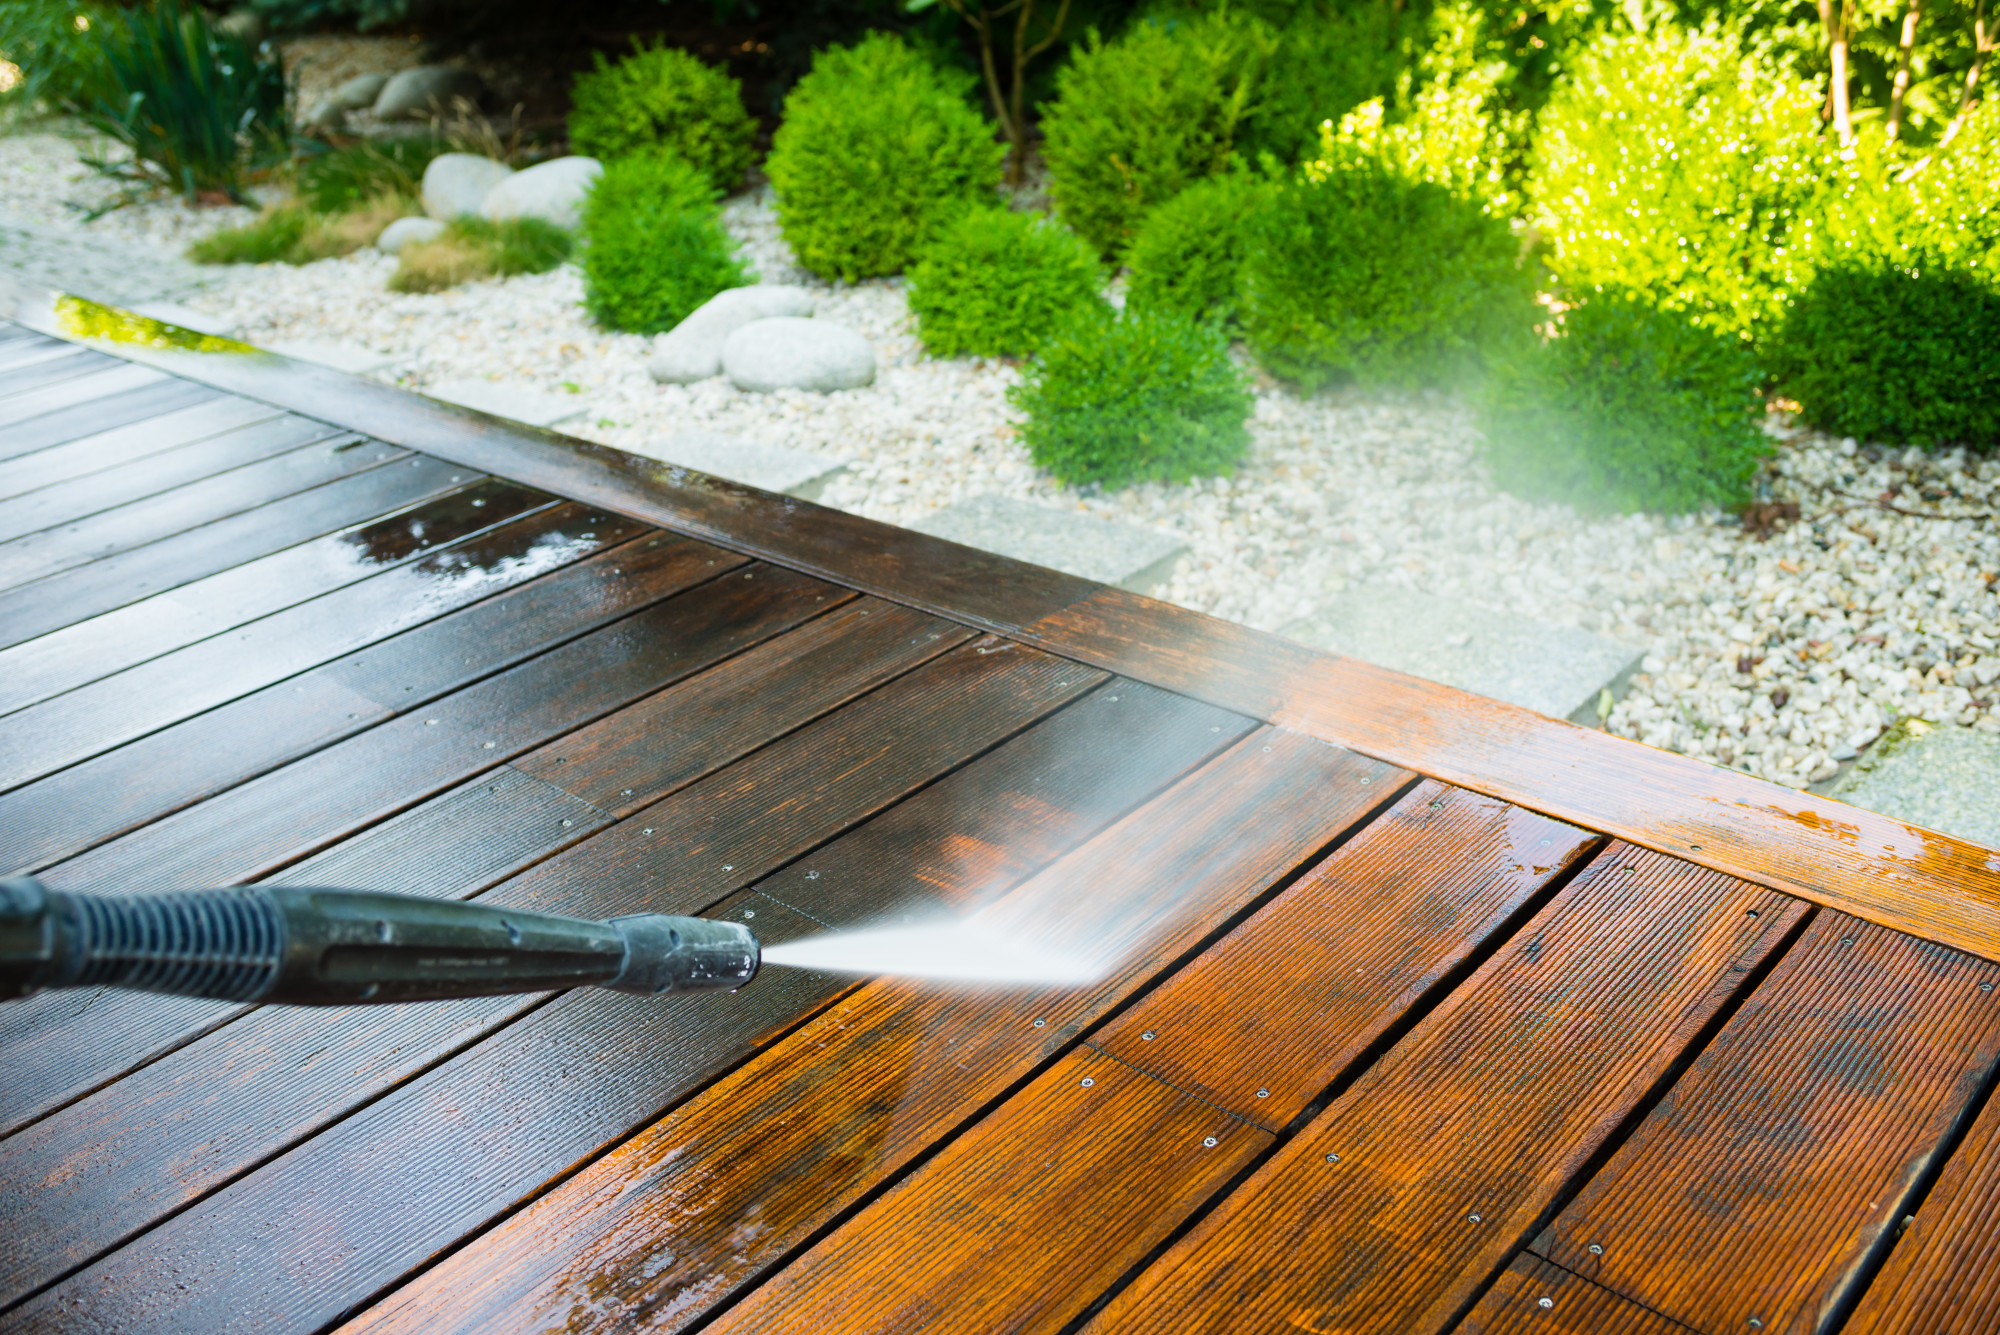 Expert fence and deck cleaning in Austin Texas by Power Wash Deluxe